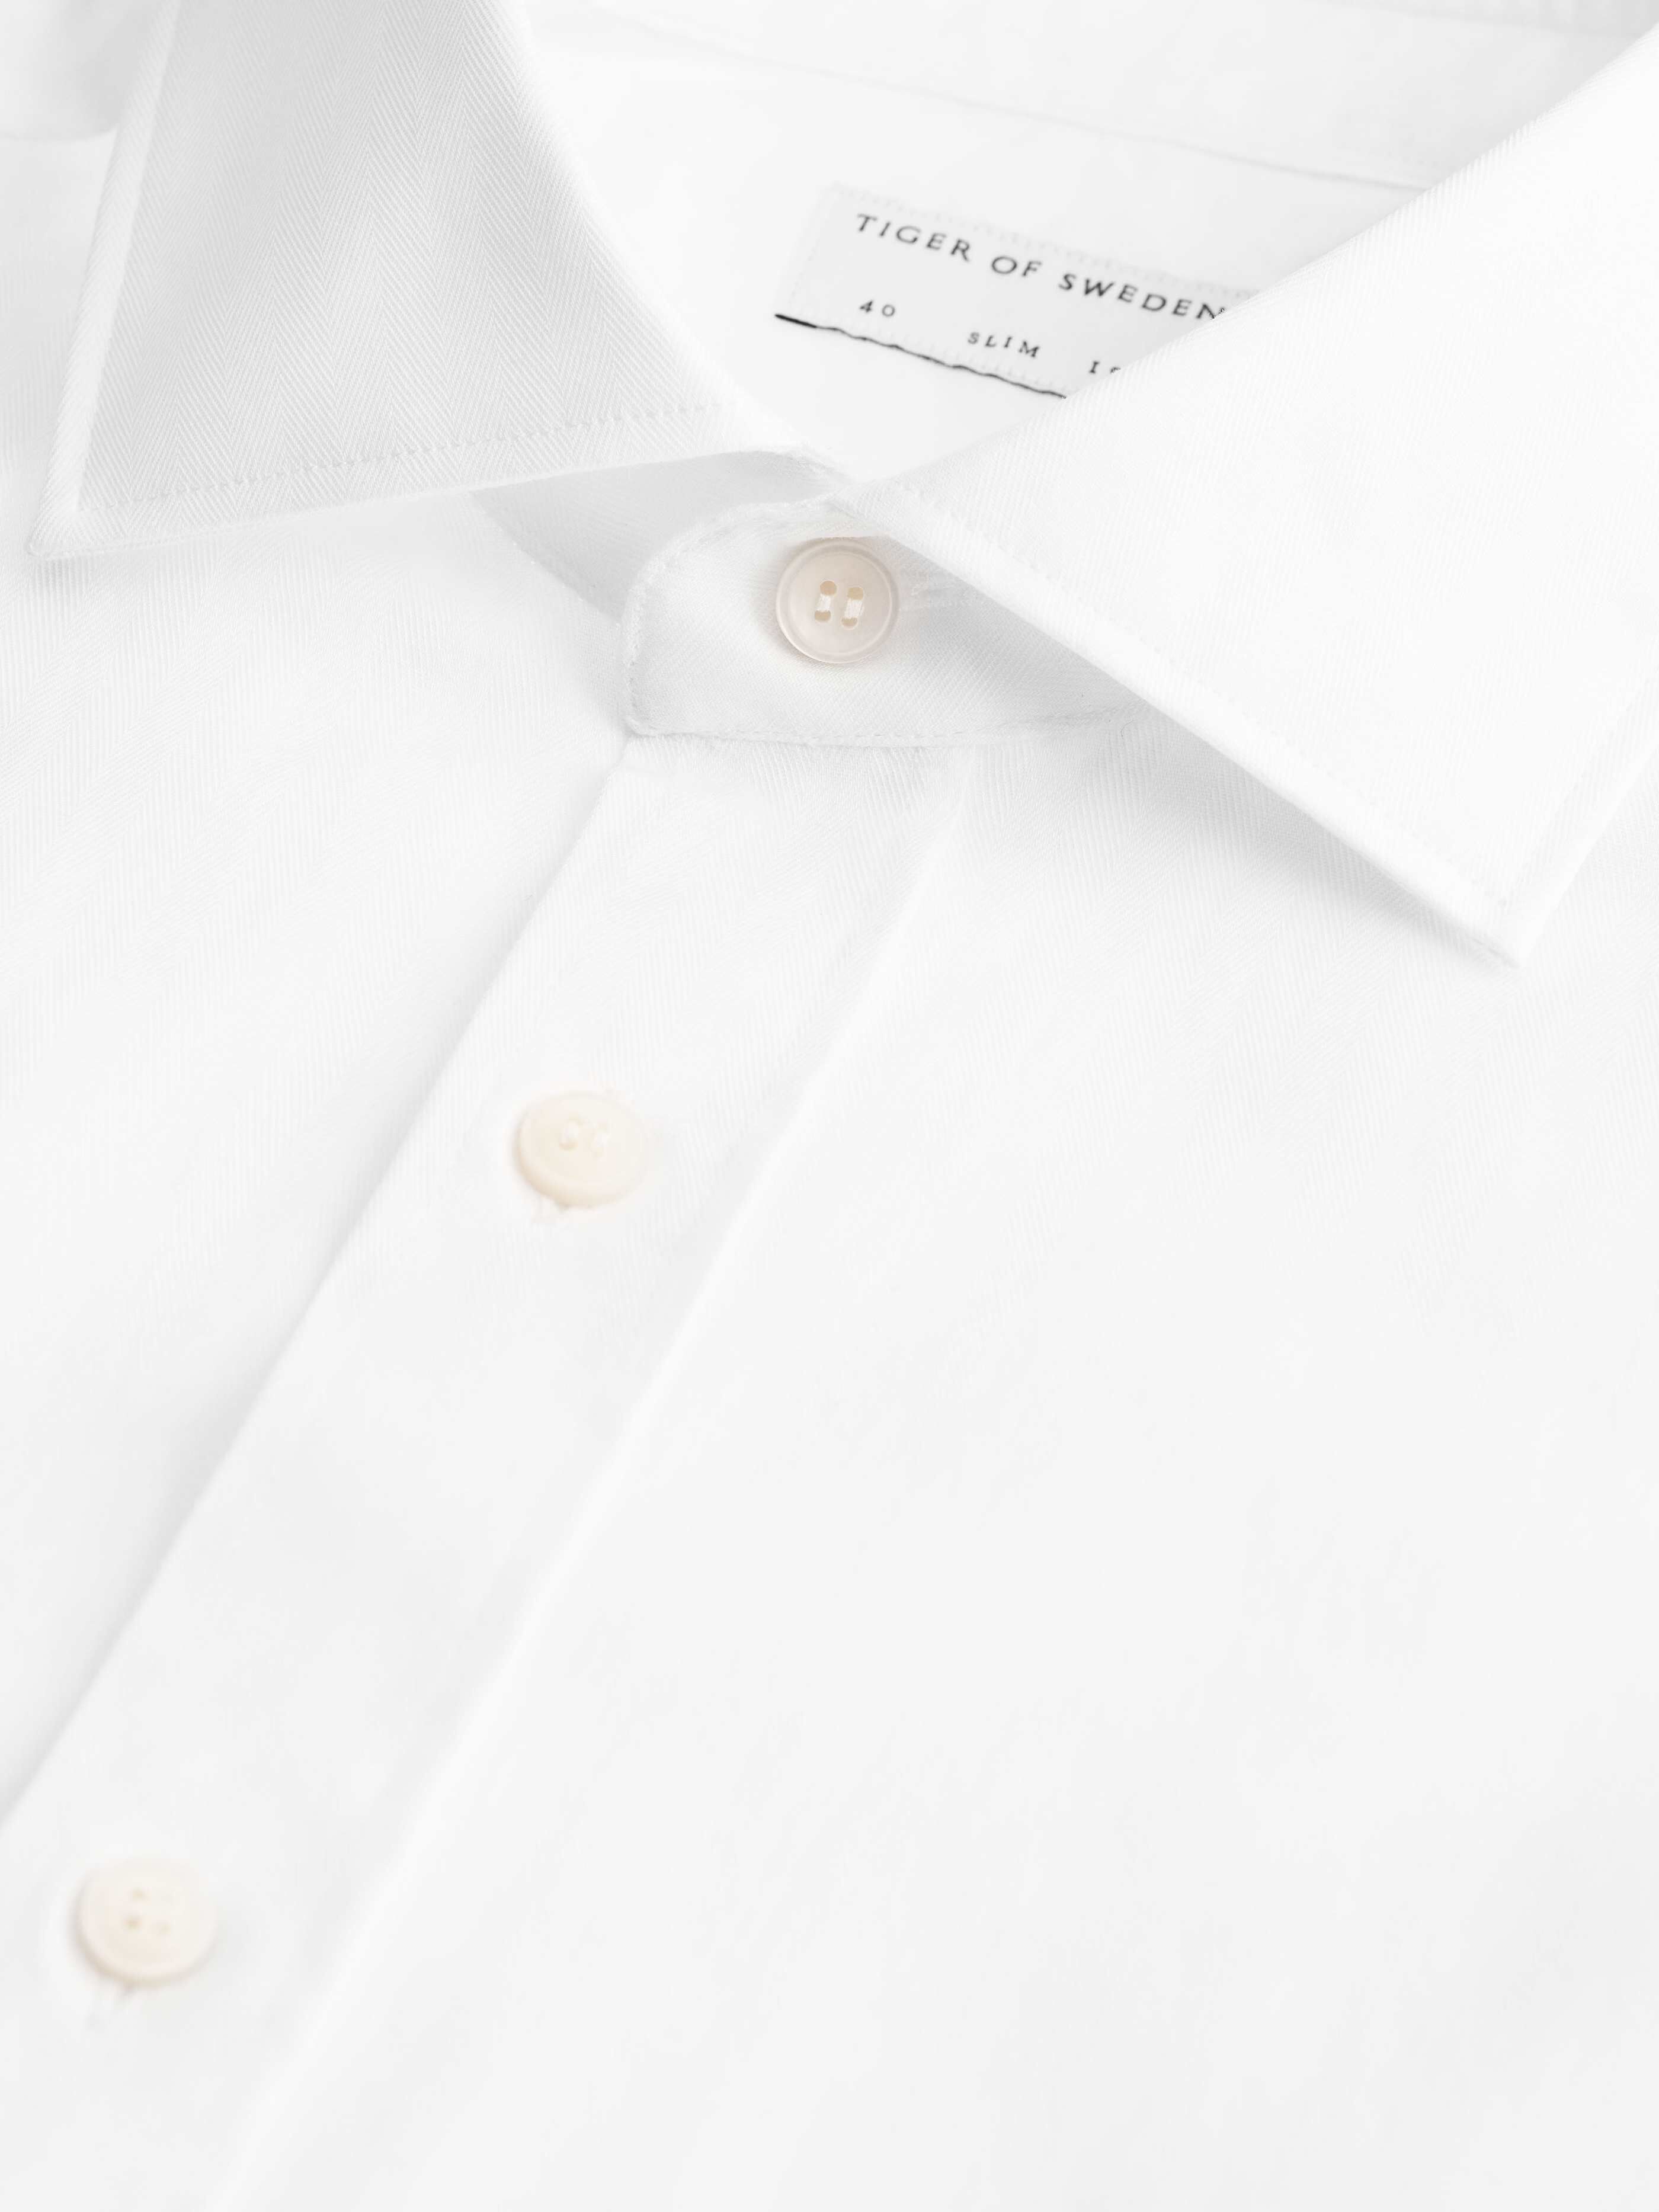 TIGER OF SWEDEN Adley Shirt in White T69541012 | Shop from eightywingold an official brand partner for Tiger of Sweden Canada and US.